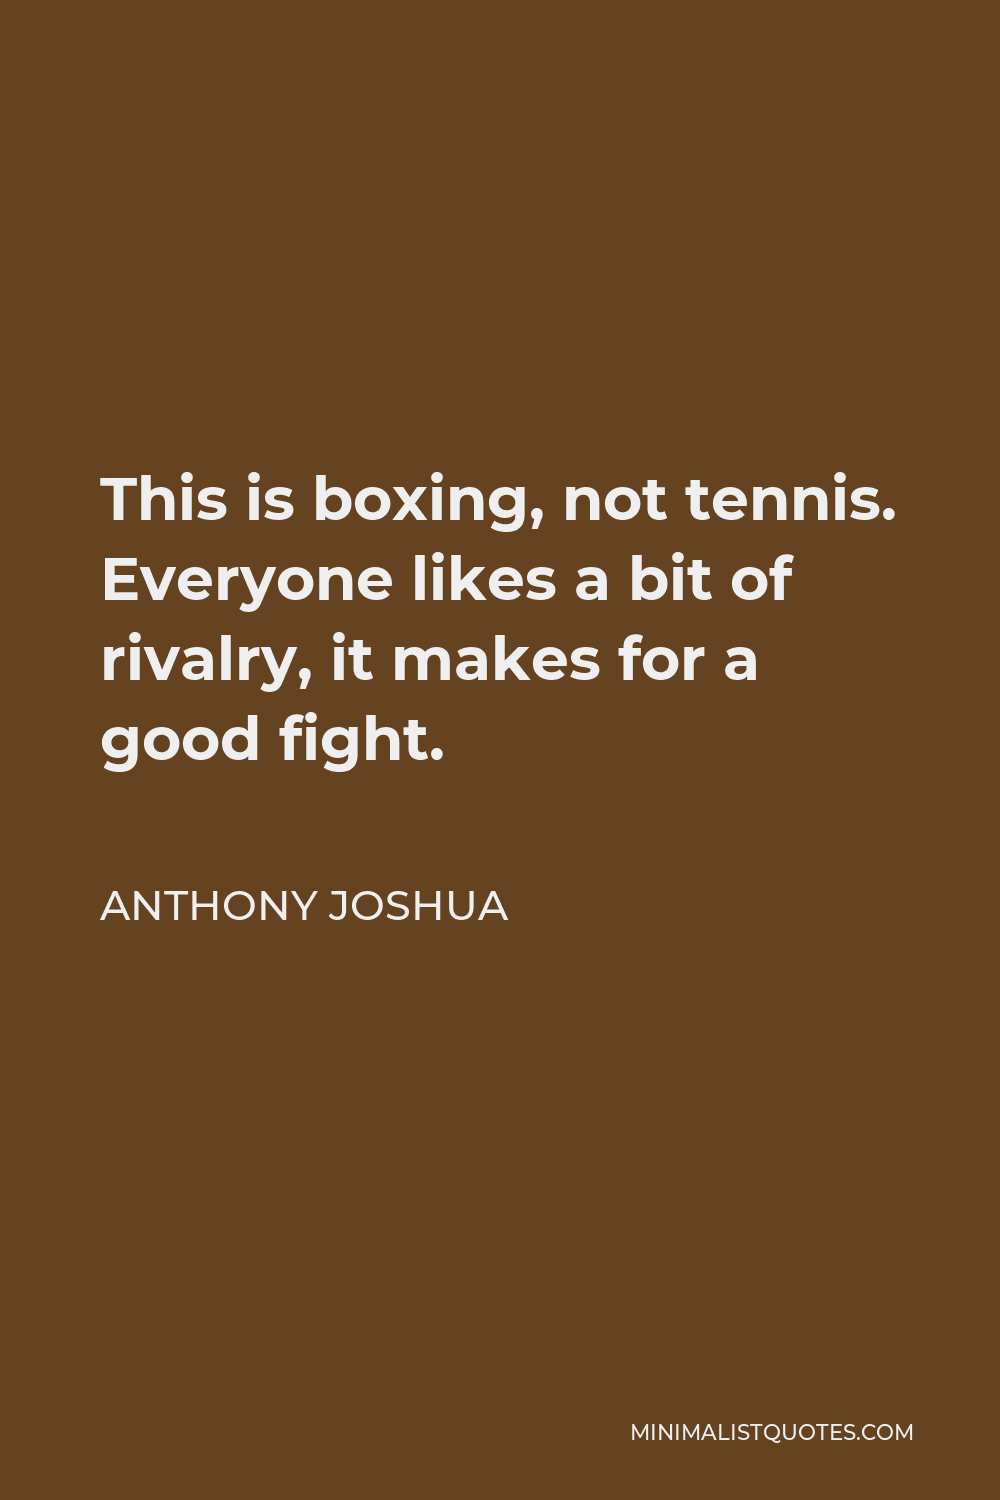 Anthony Joshua Quote - This is boxing, not tennis. Everyone likes a bit of rivalry, it makes for a good fight.